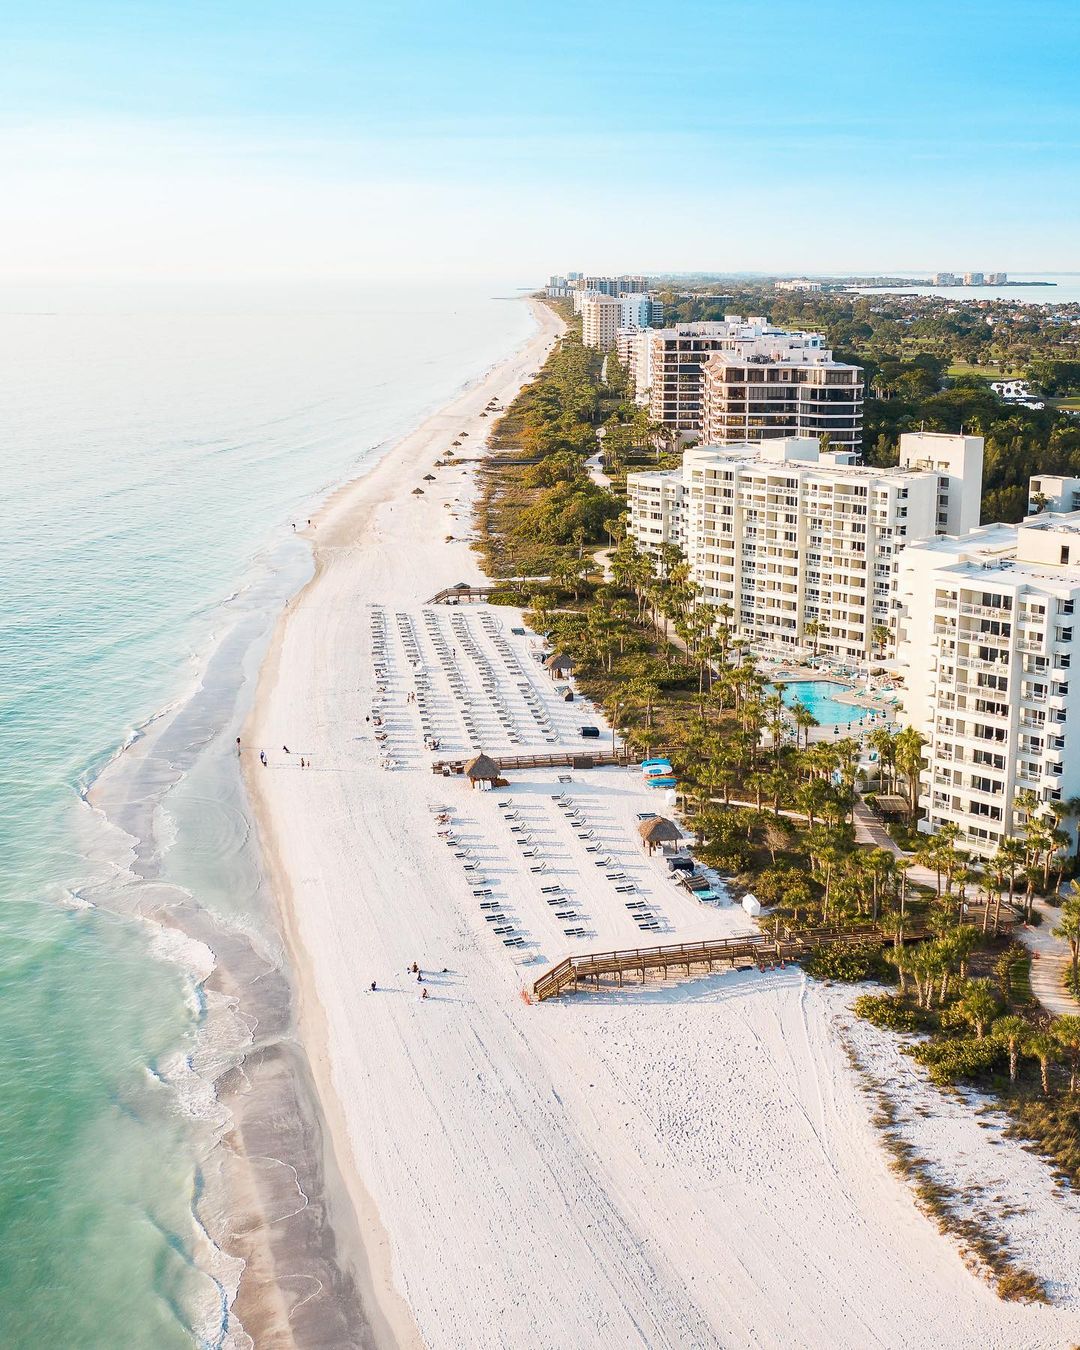 Drone Photo of the White San Beaches in Sarasota, FL. Photo by Instagram user @chasingthedronelife